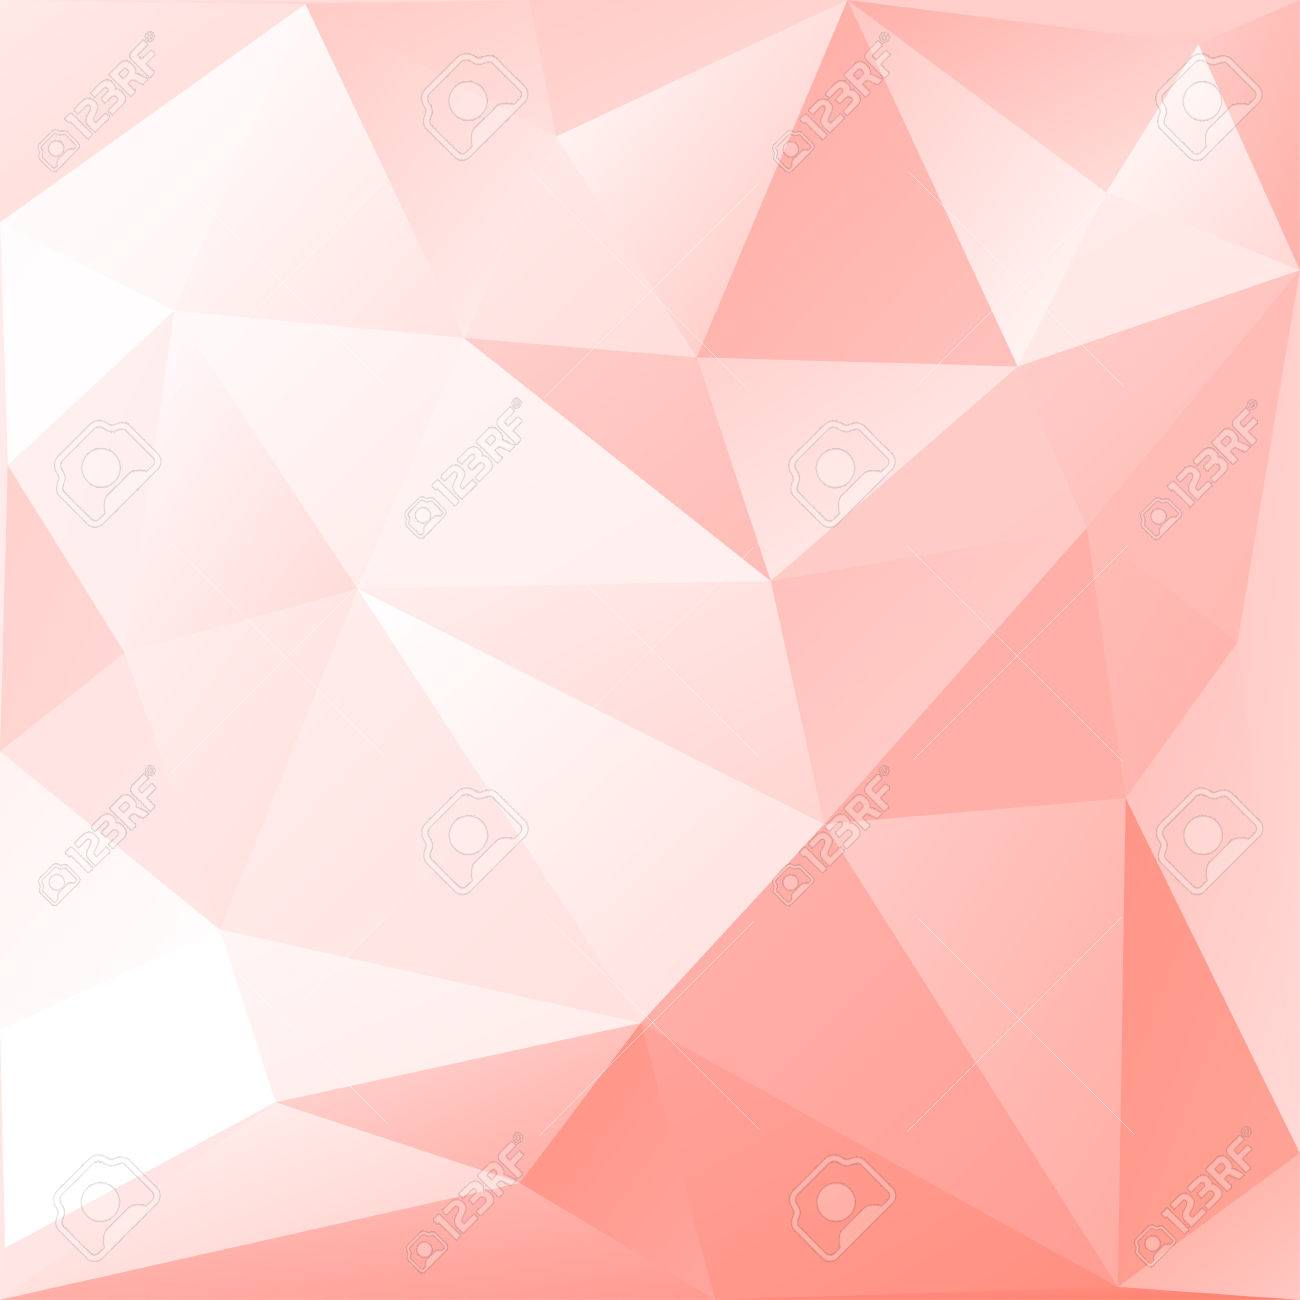 Abstract Low Poly Background Of Triangles In Peach Colors Royalty 1300x1300